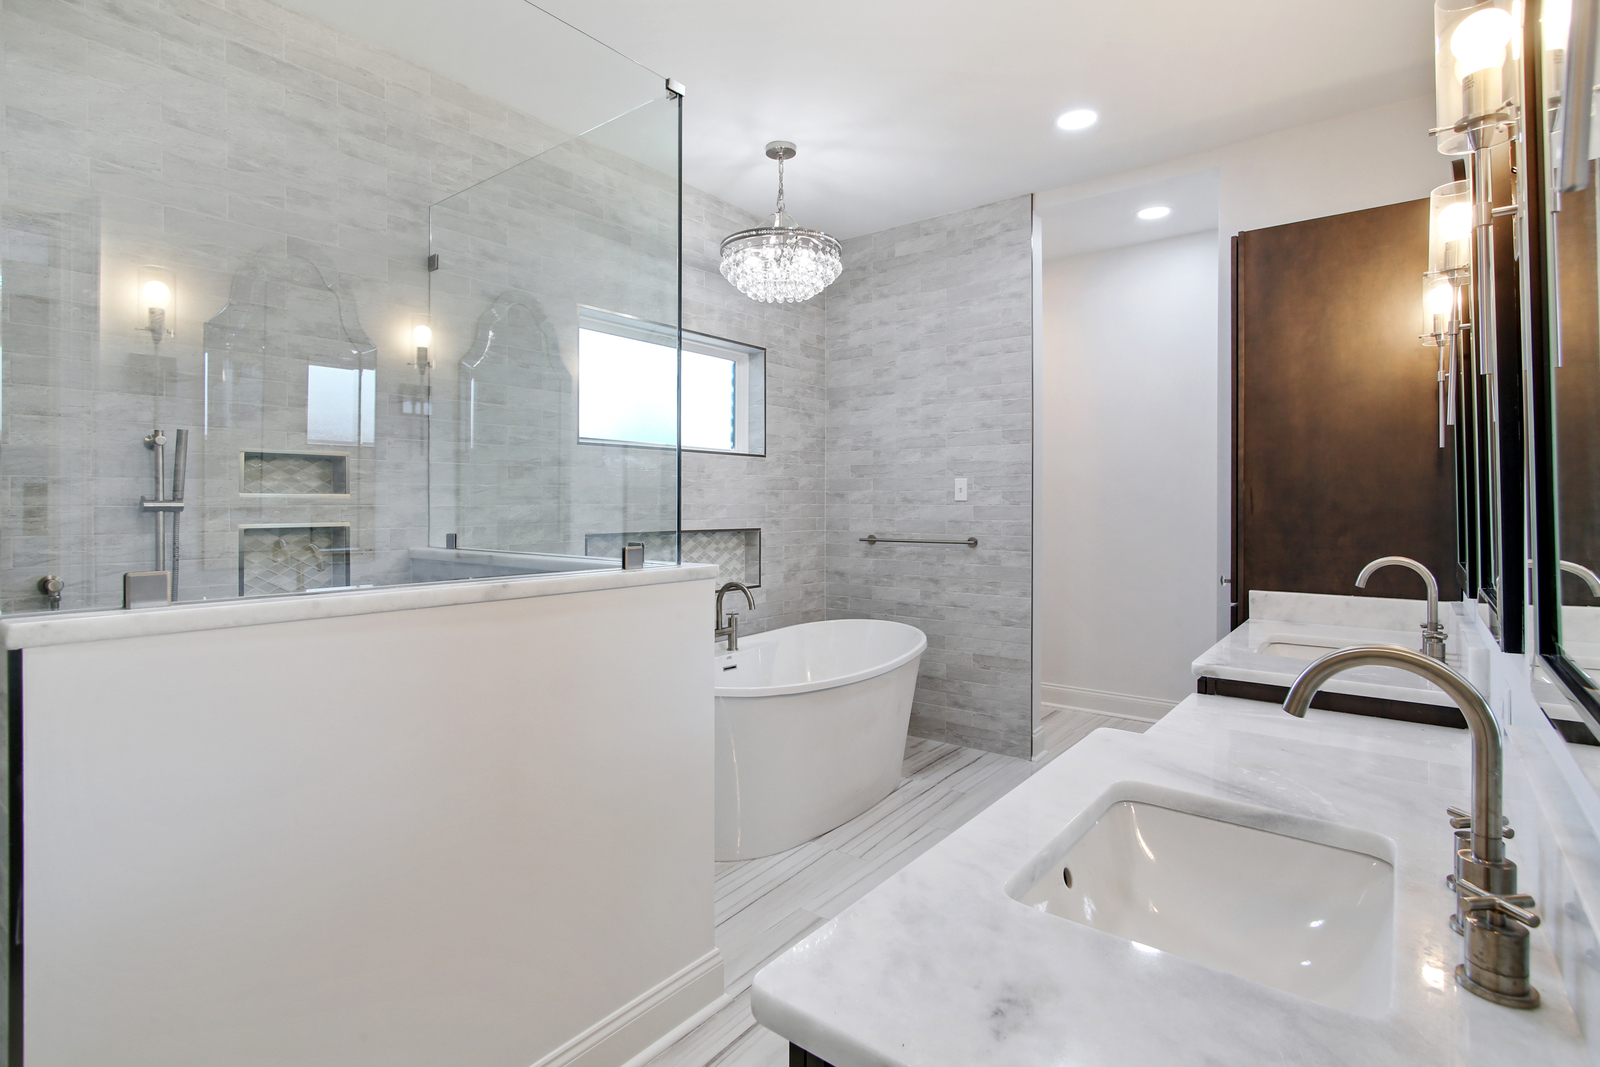 Heights House Bathroom Home Addition designed and built by DMG Design+Build